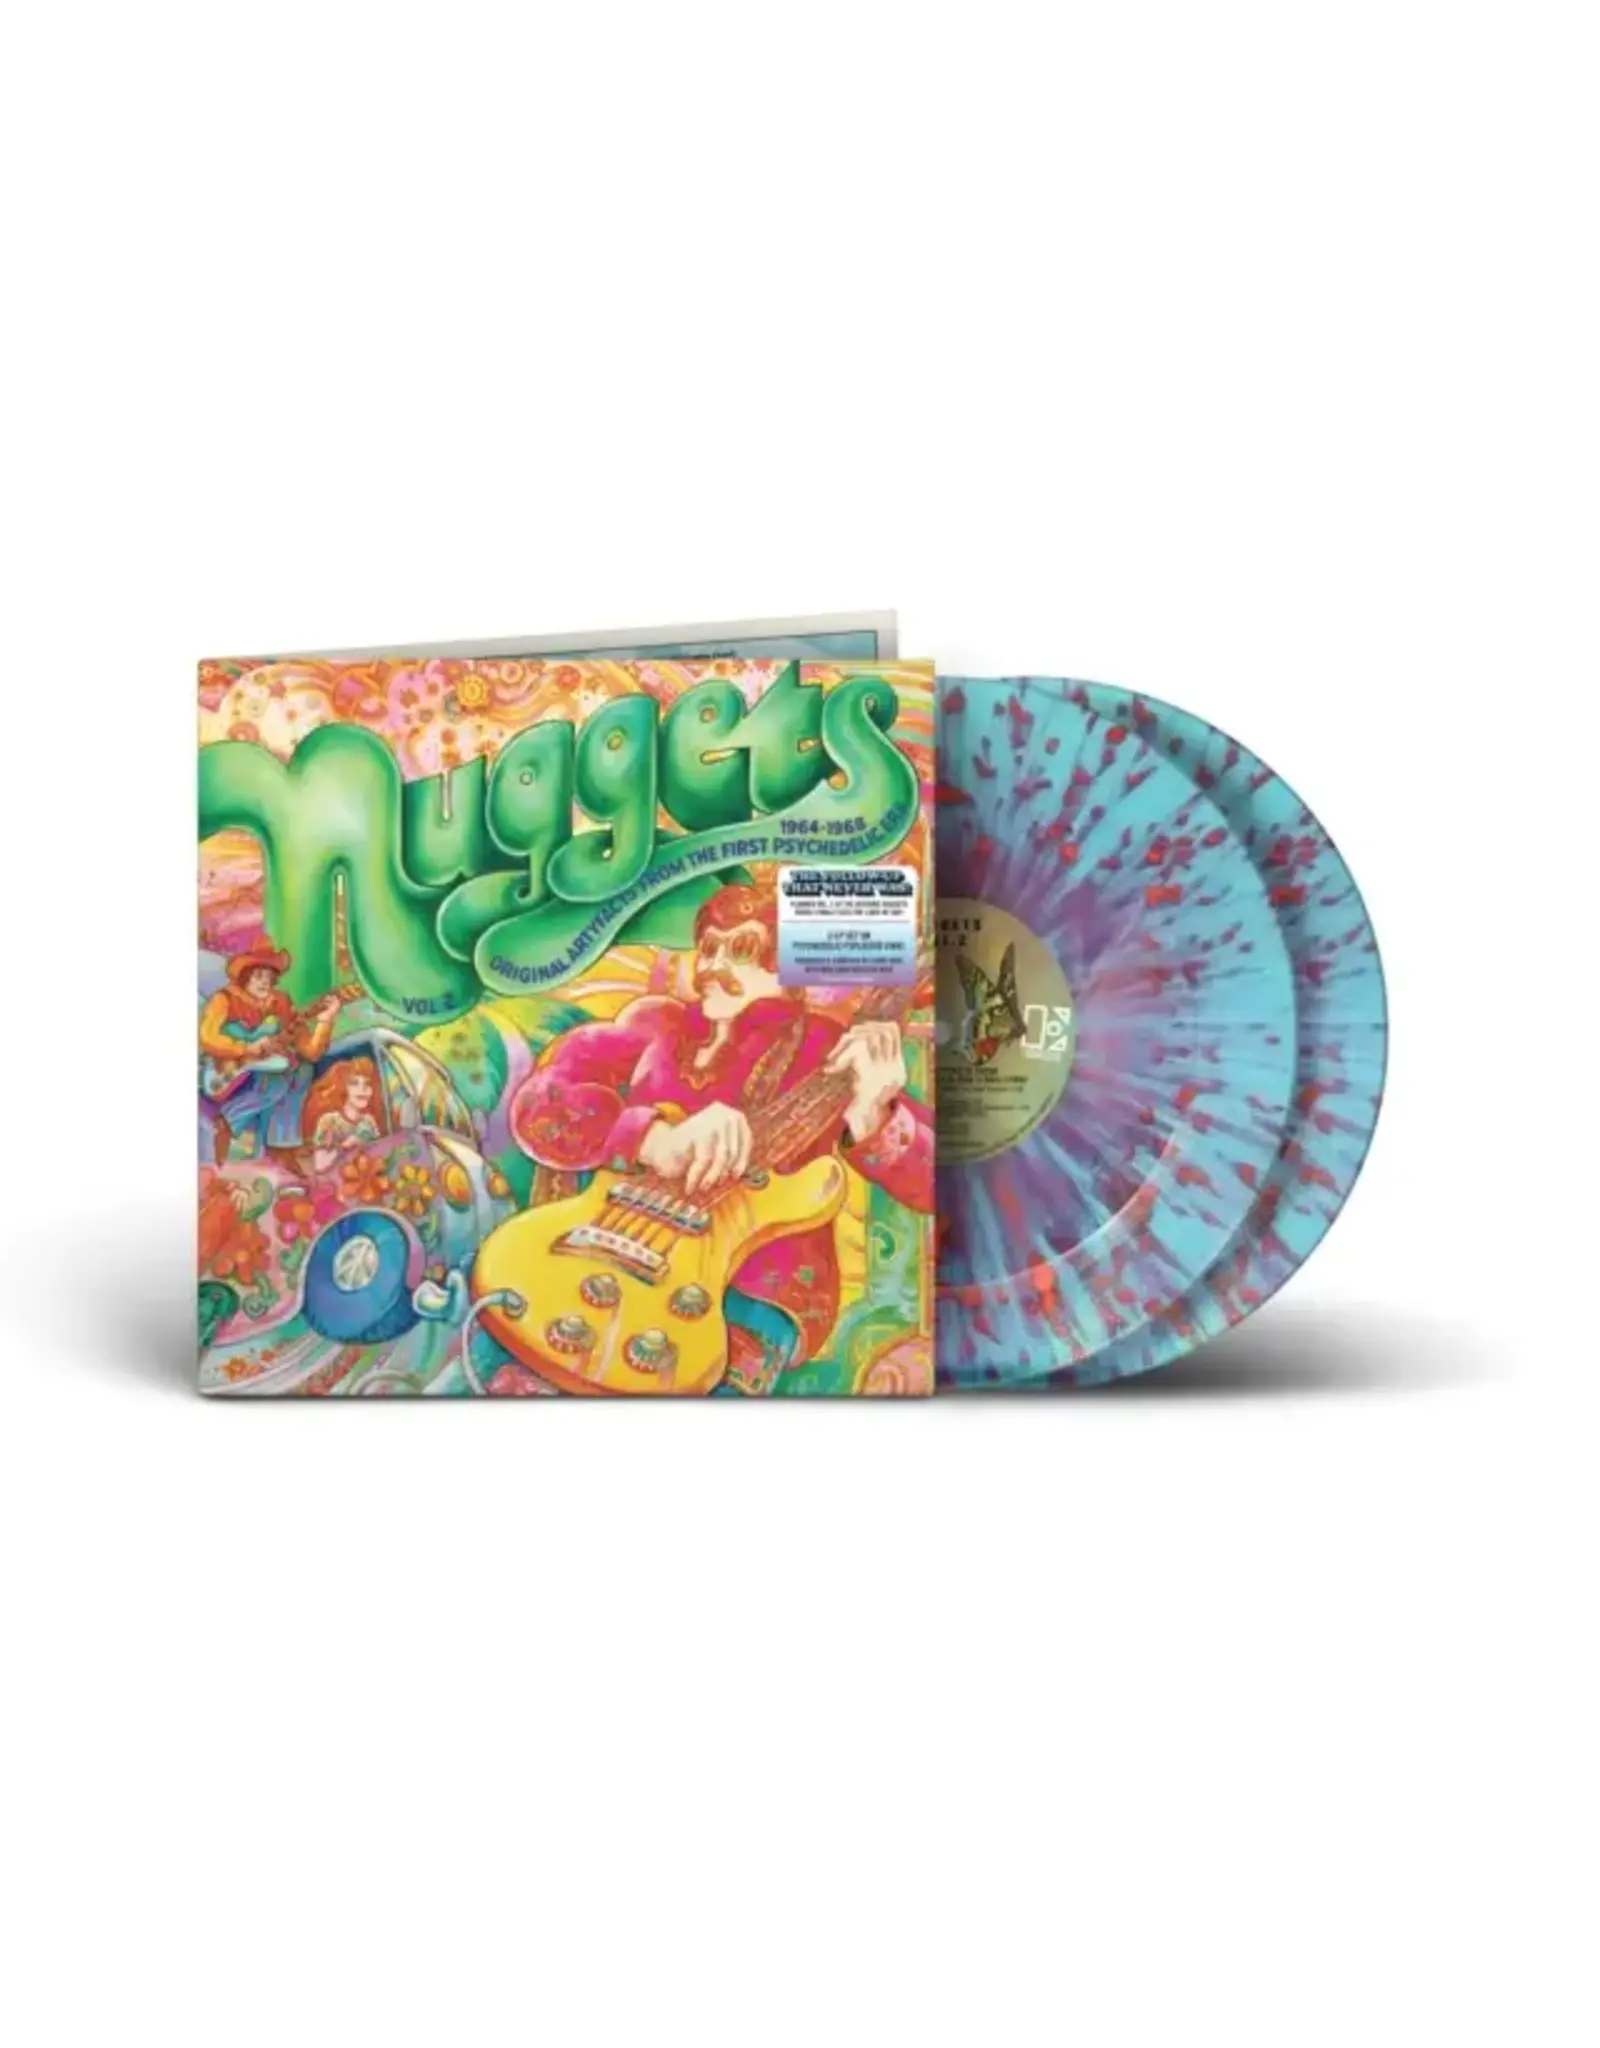 Rhino Various: Nuggets: Original Artyfacts From The First Psychedelic Era Vol. 2 LP